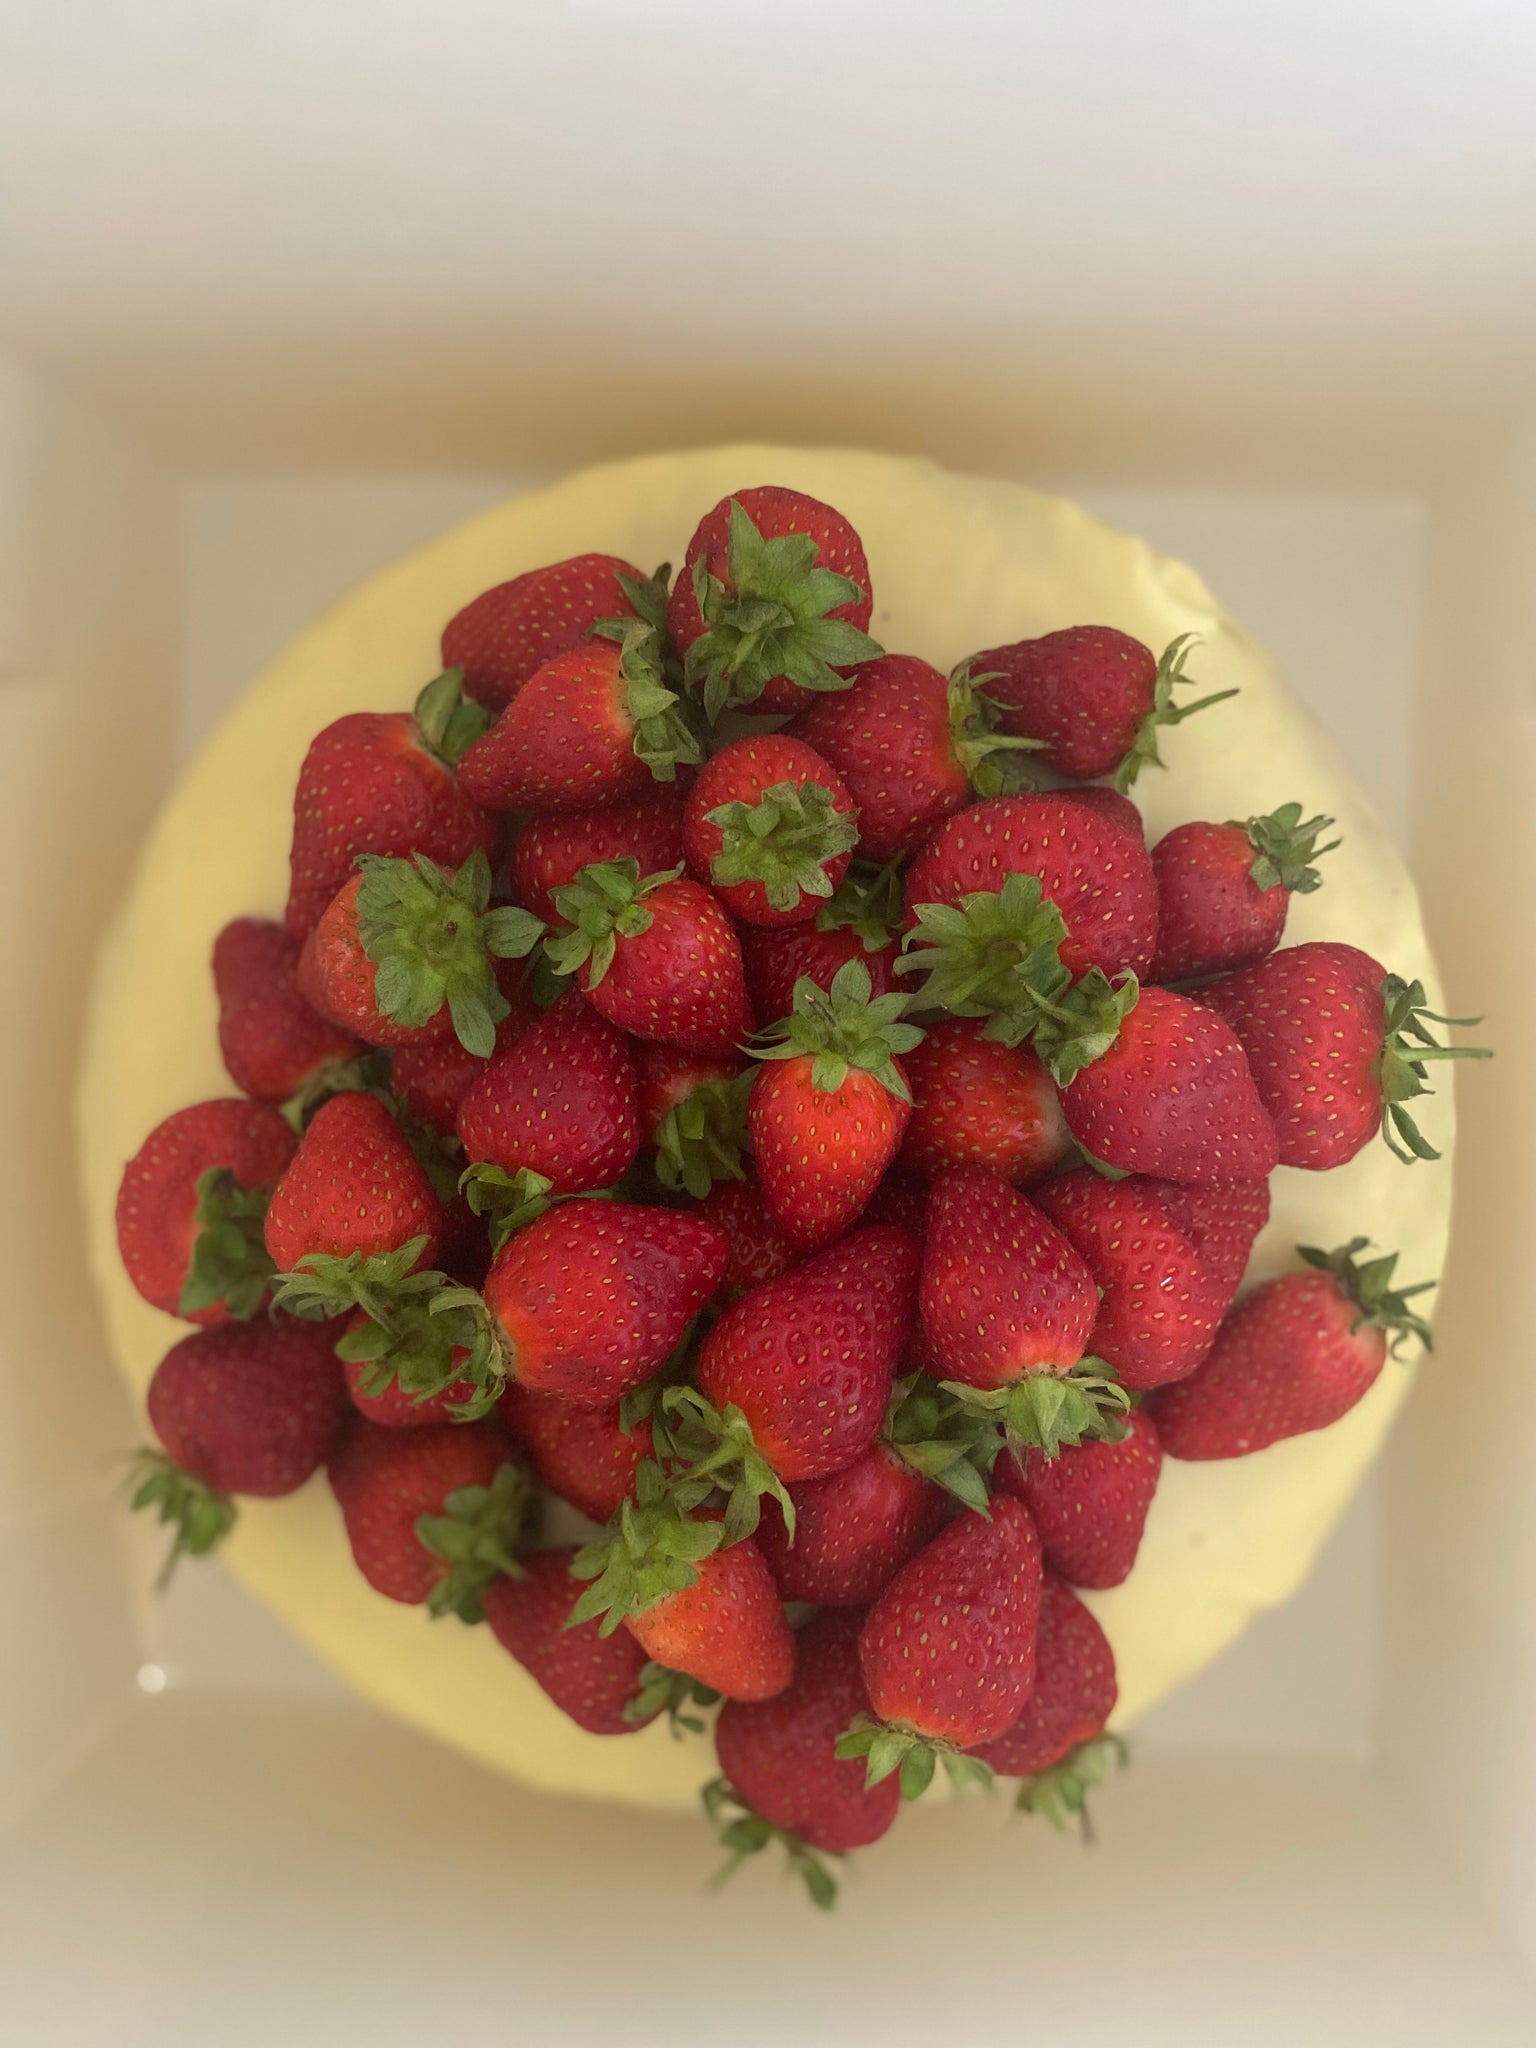 White Chocolate & Strawberries cake - click here for more options